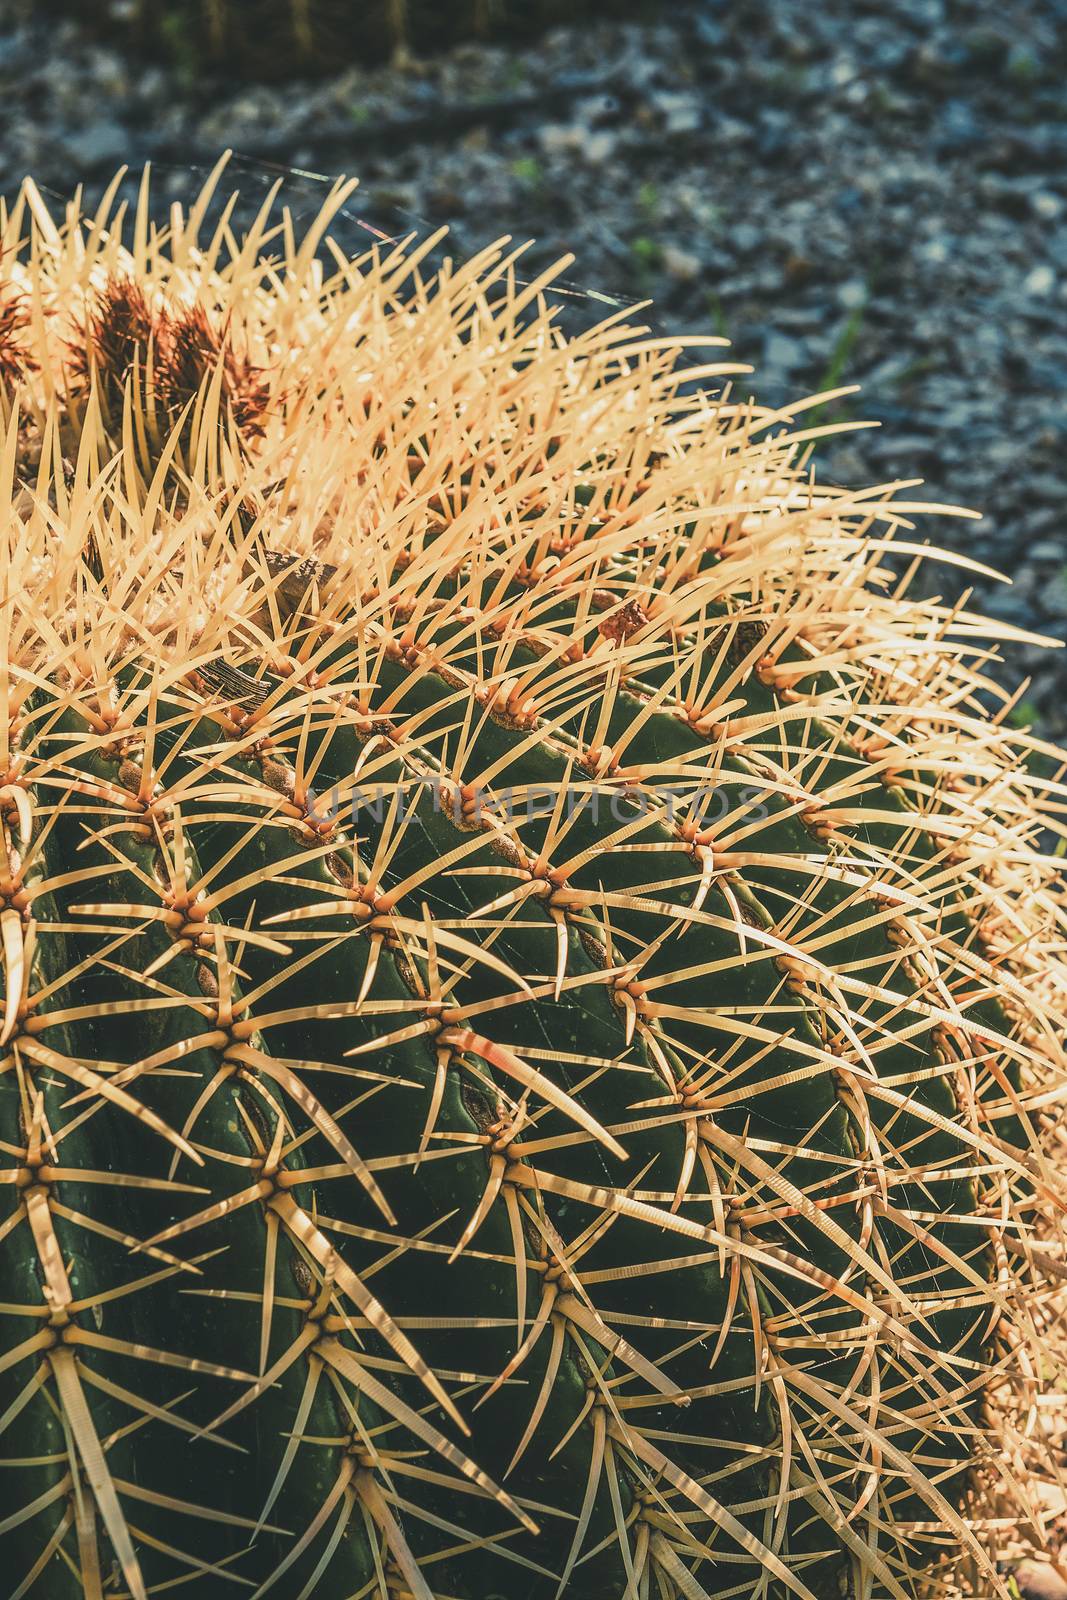 Vertical closeup of one Golden Barrel cactus with spike thorns in a desert garden, Echinocactus Grusonii, copy space for text